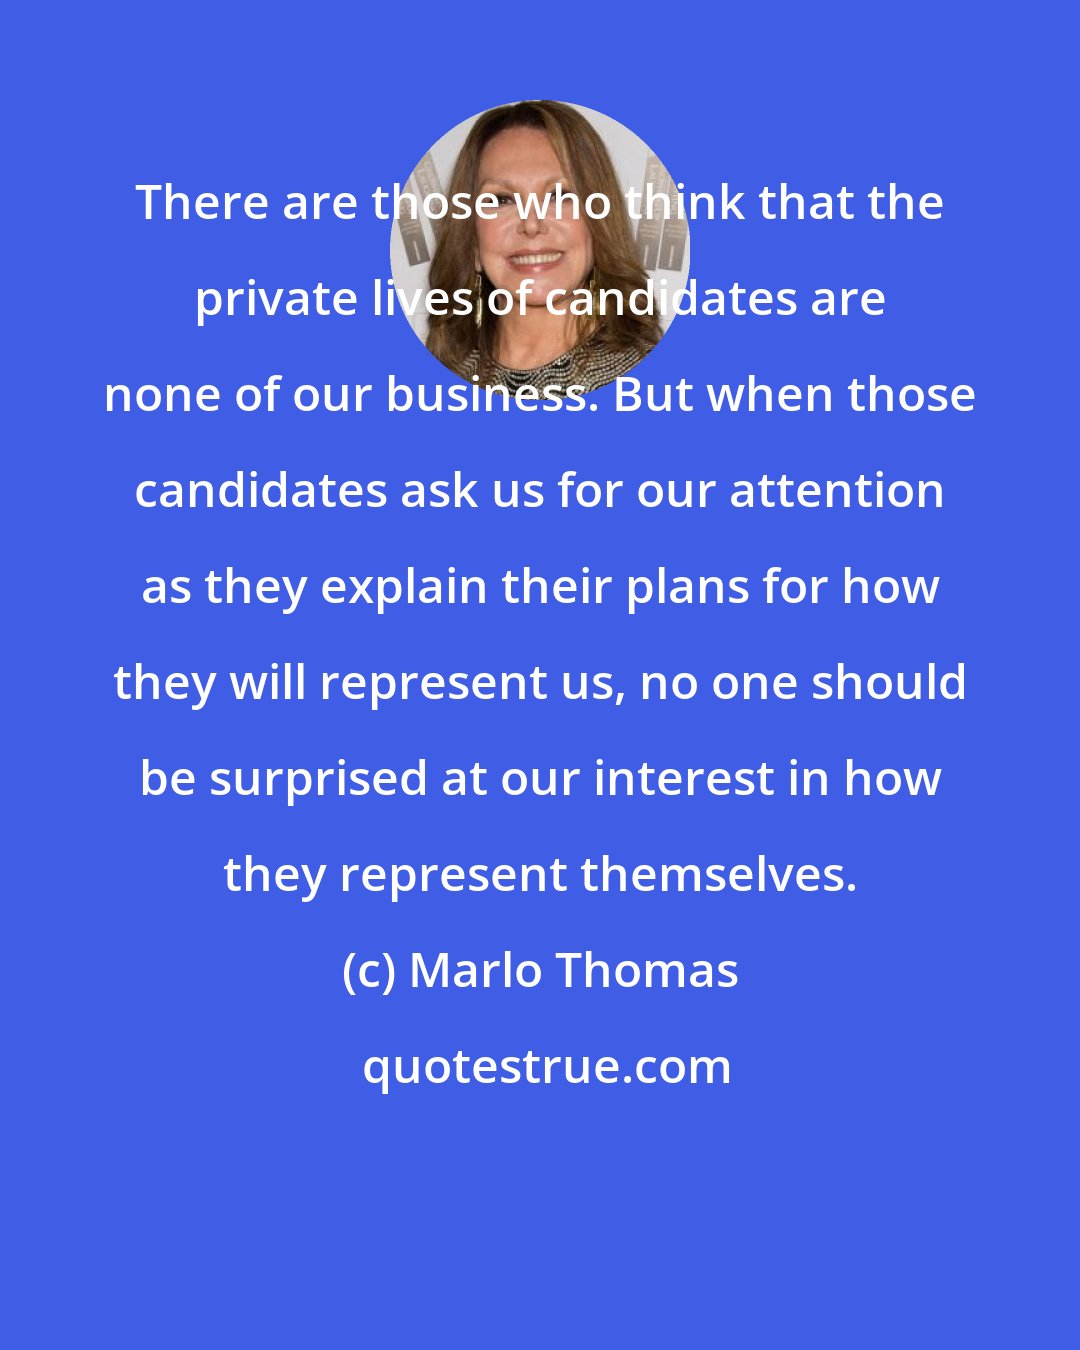 Marlo Thomas: There are those who think that the private lives of candidates are none of our business. But when those candidates ask us for our attention as they explain their plans for how they will represent us, no one should be surprised at our interest in how they represent themselves.